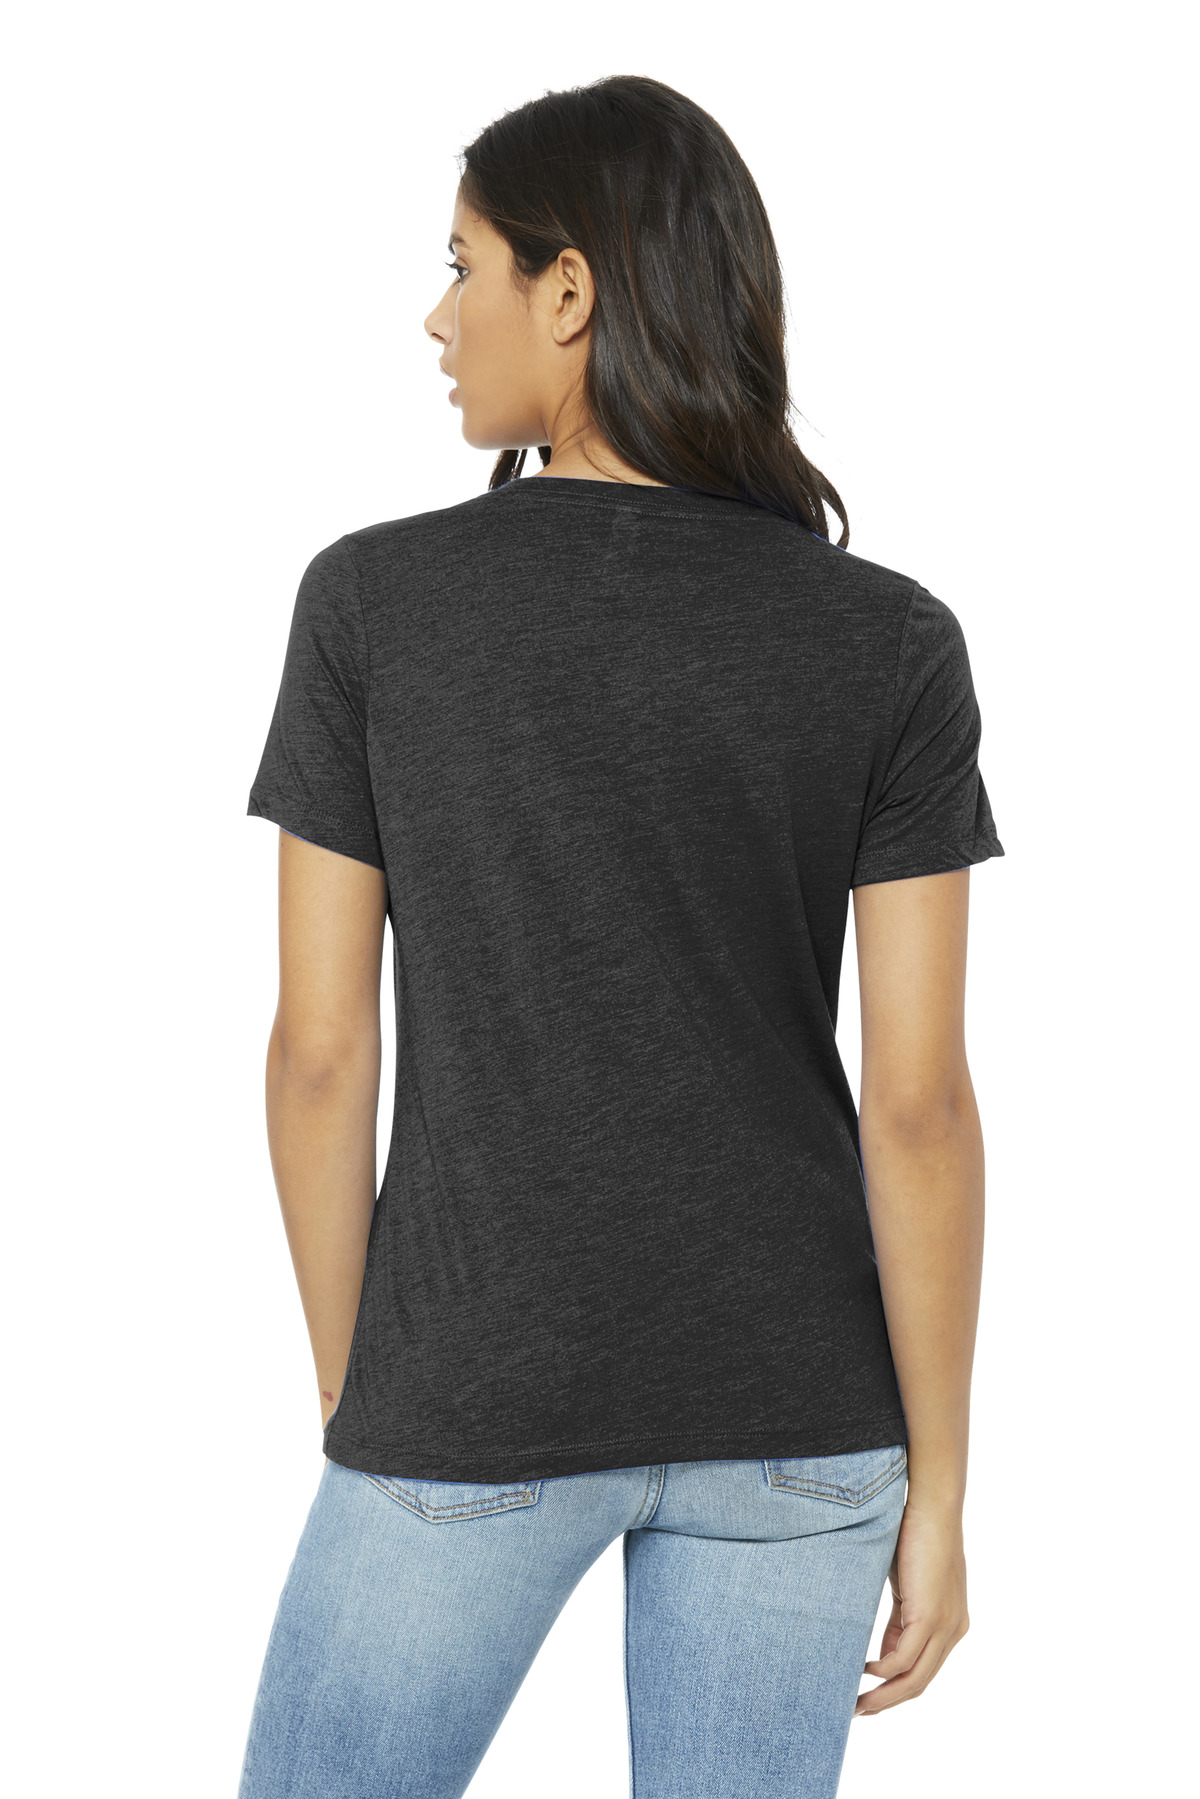 BELLA+CANVAS Women’s Relaxed Triblend V-Neck Tee BC6415 | Uniforms Today